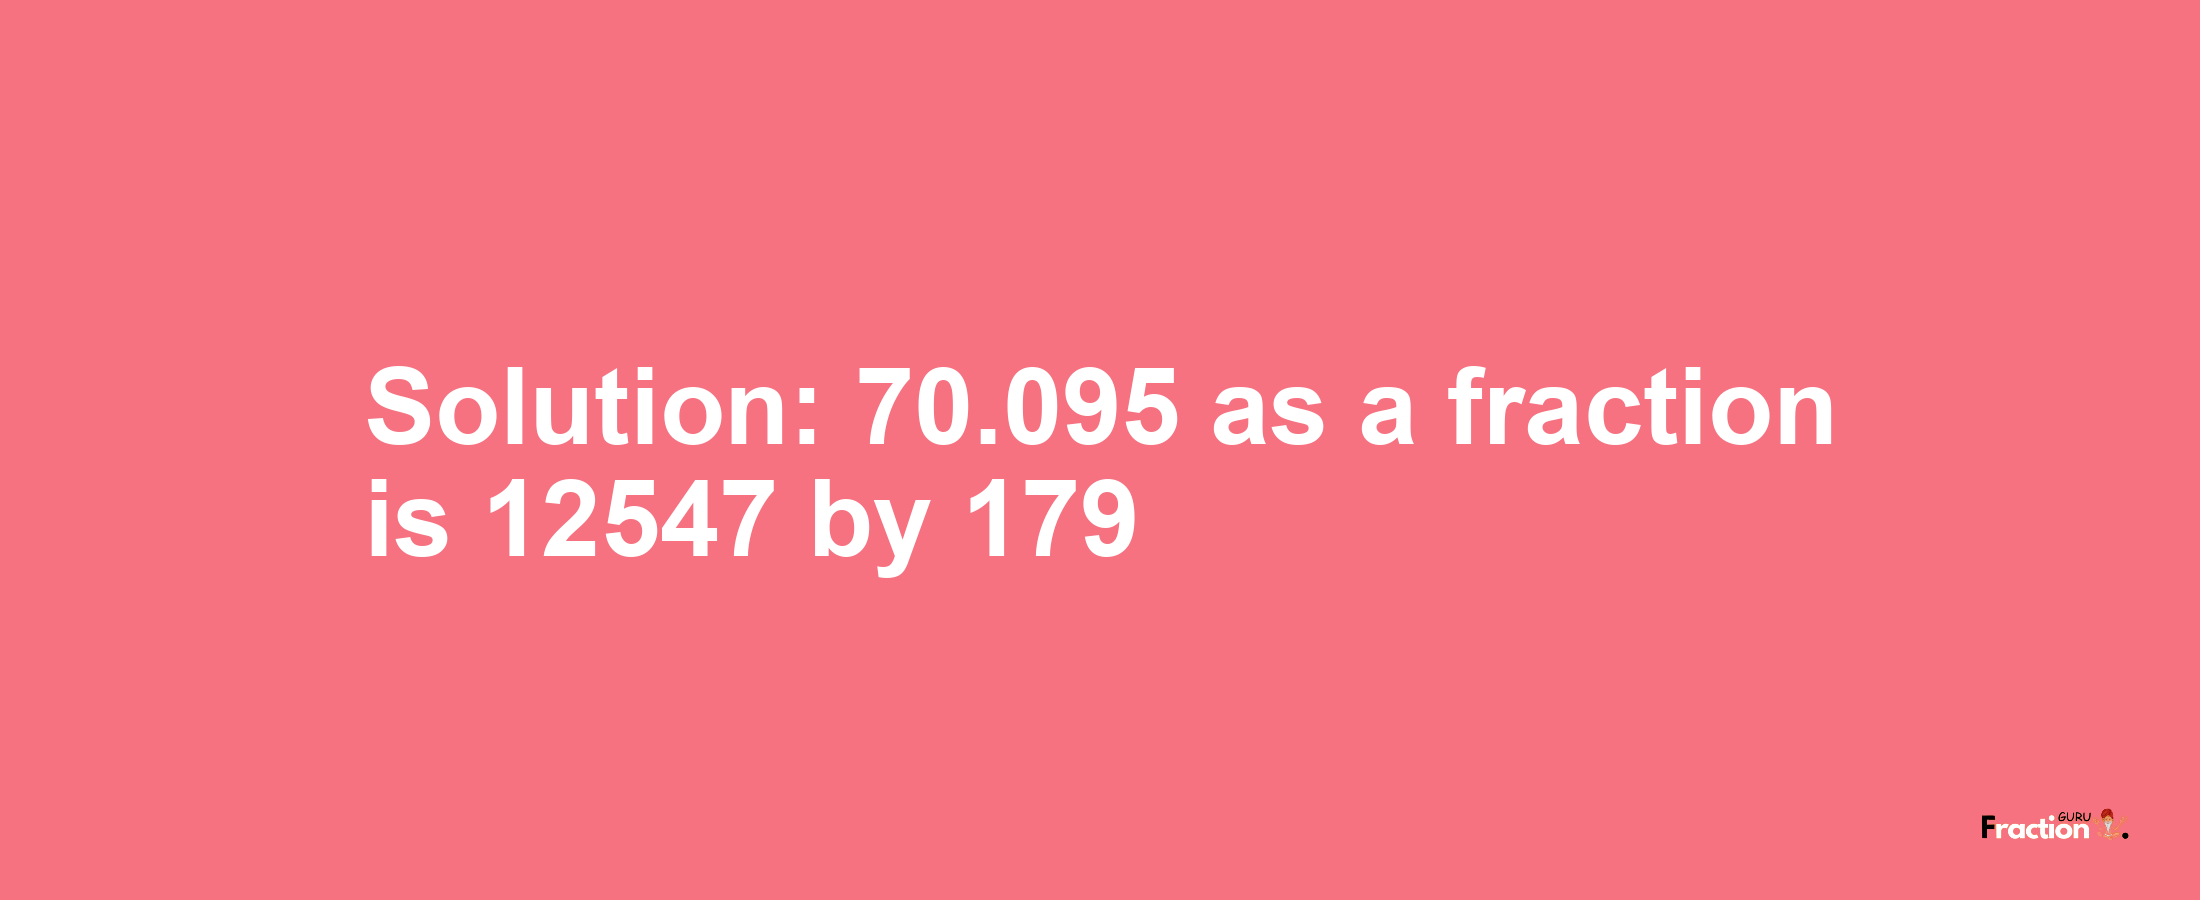 Solution:70.095 as a fraction is 12547/179